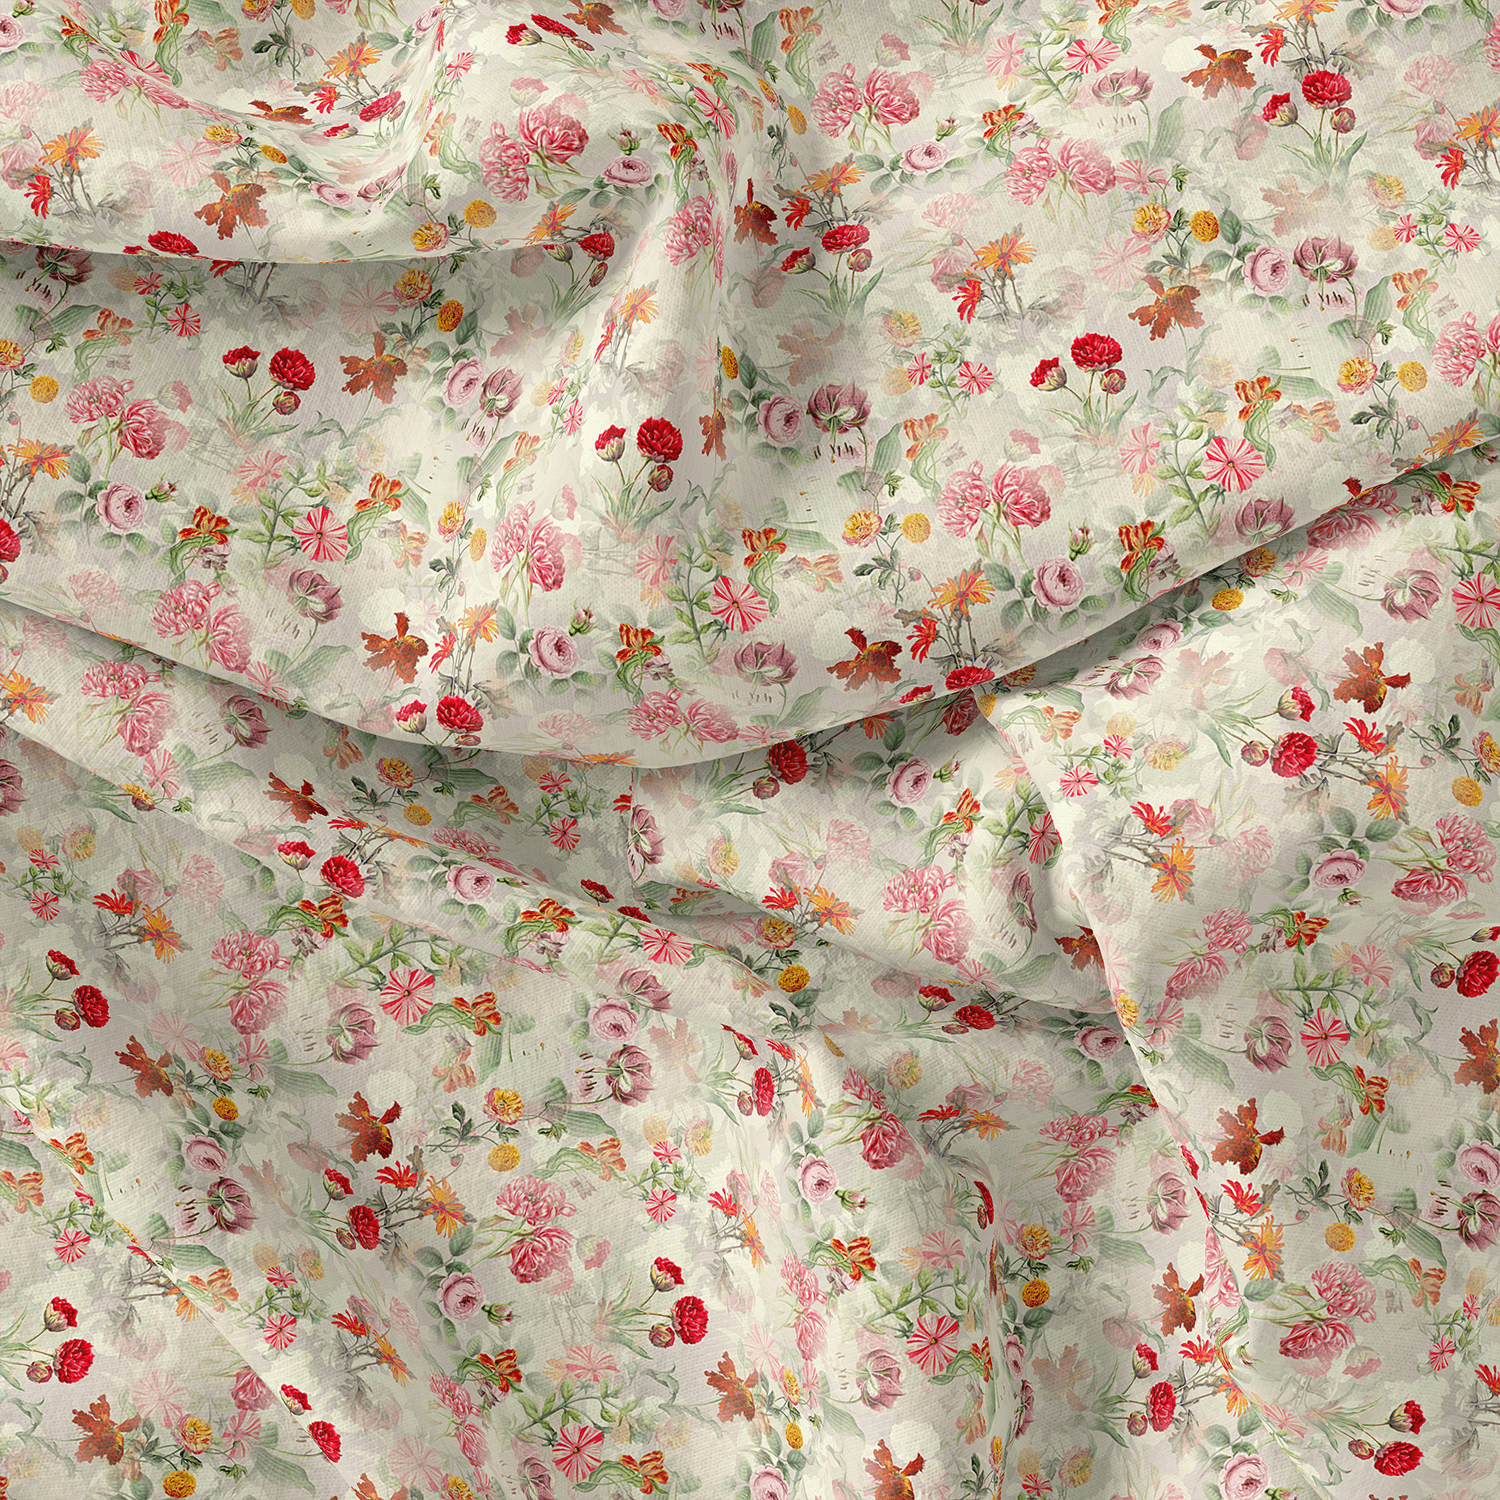 Cotton Dress Fabric Guide: Pros & Cons, Types, and Care Tips